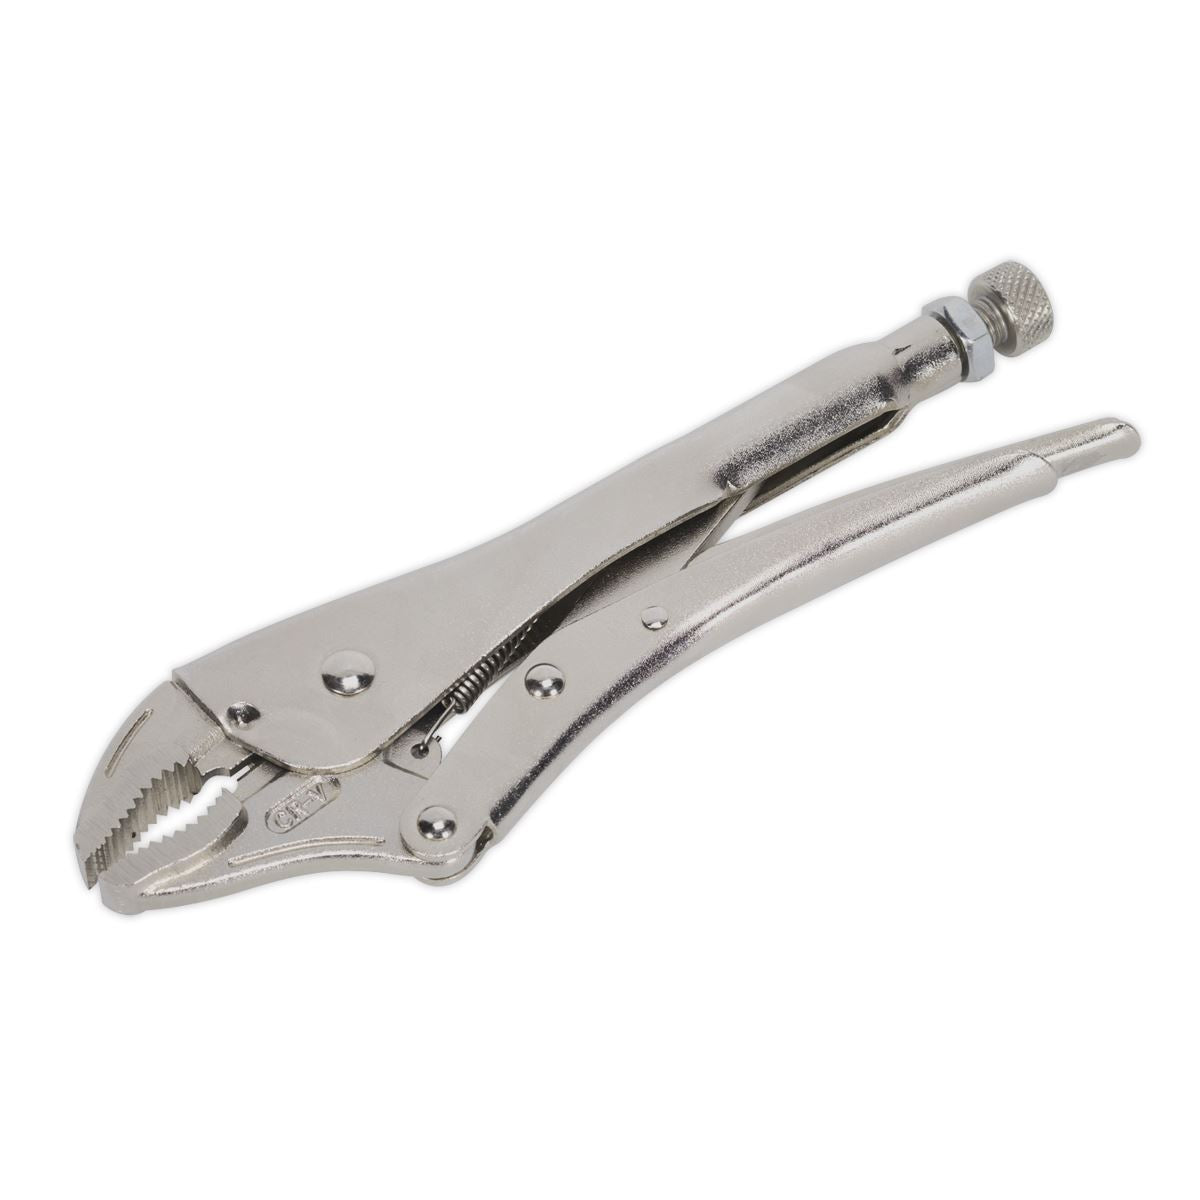 Sealey Premier Locking Pliers Curved Jaws 225mm 0-47mm Capacity